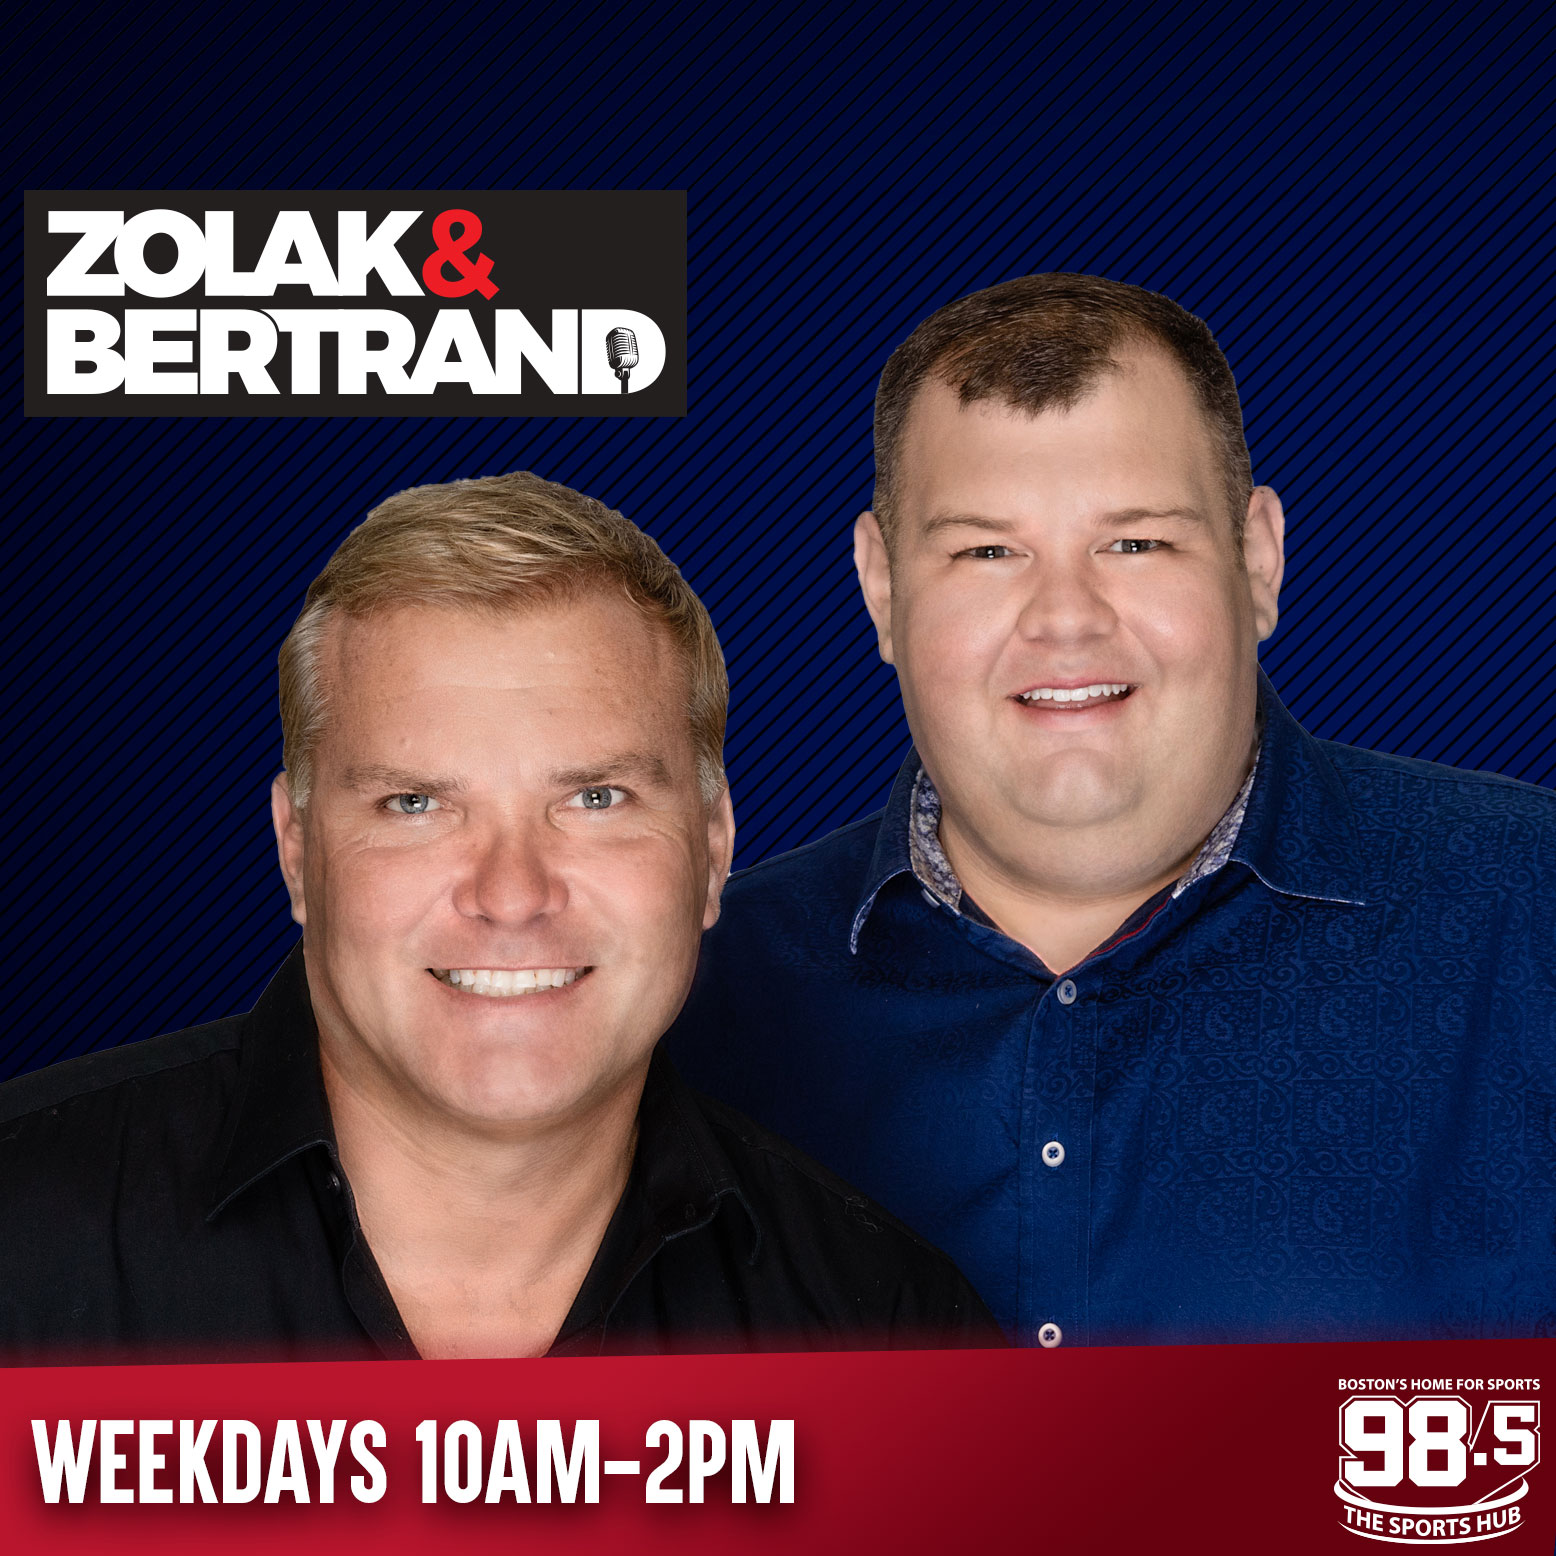 Zolak & Bertrand: Phil Perry on how the Patriots can slow down the Dolphins offense